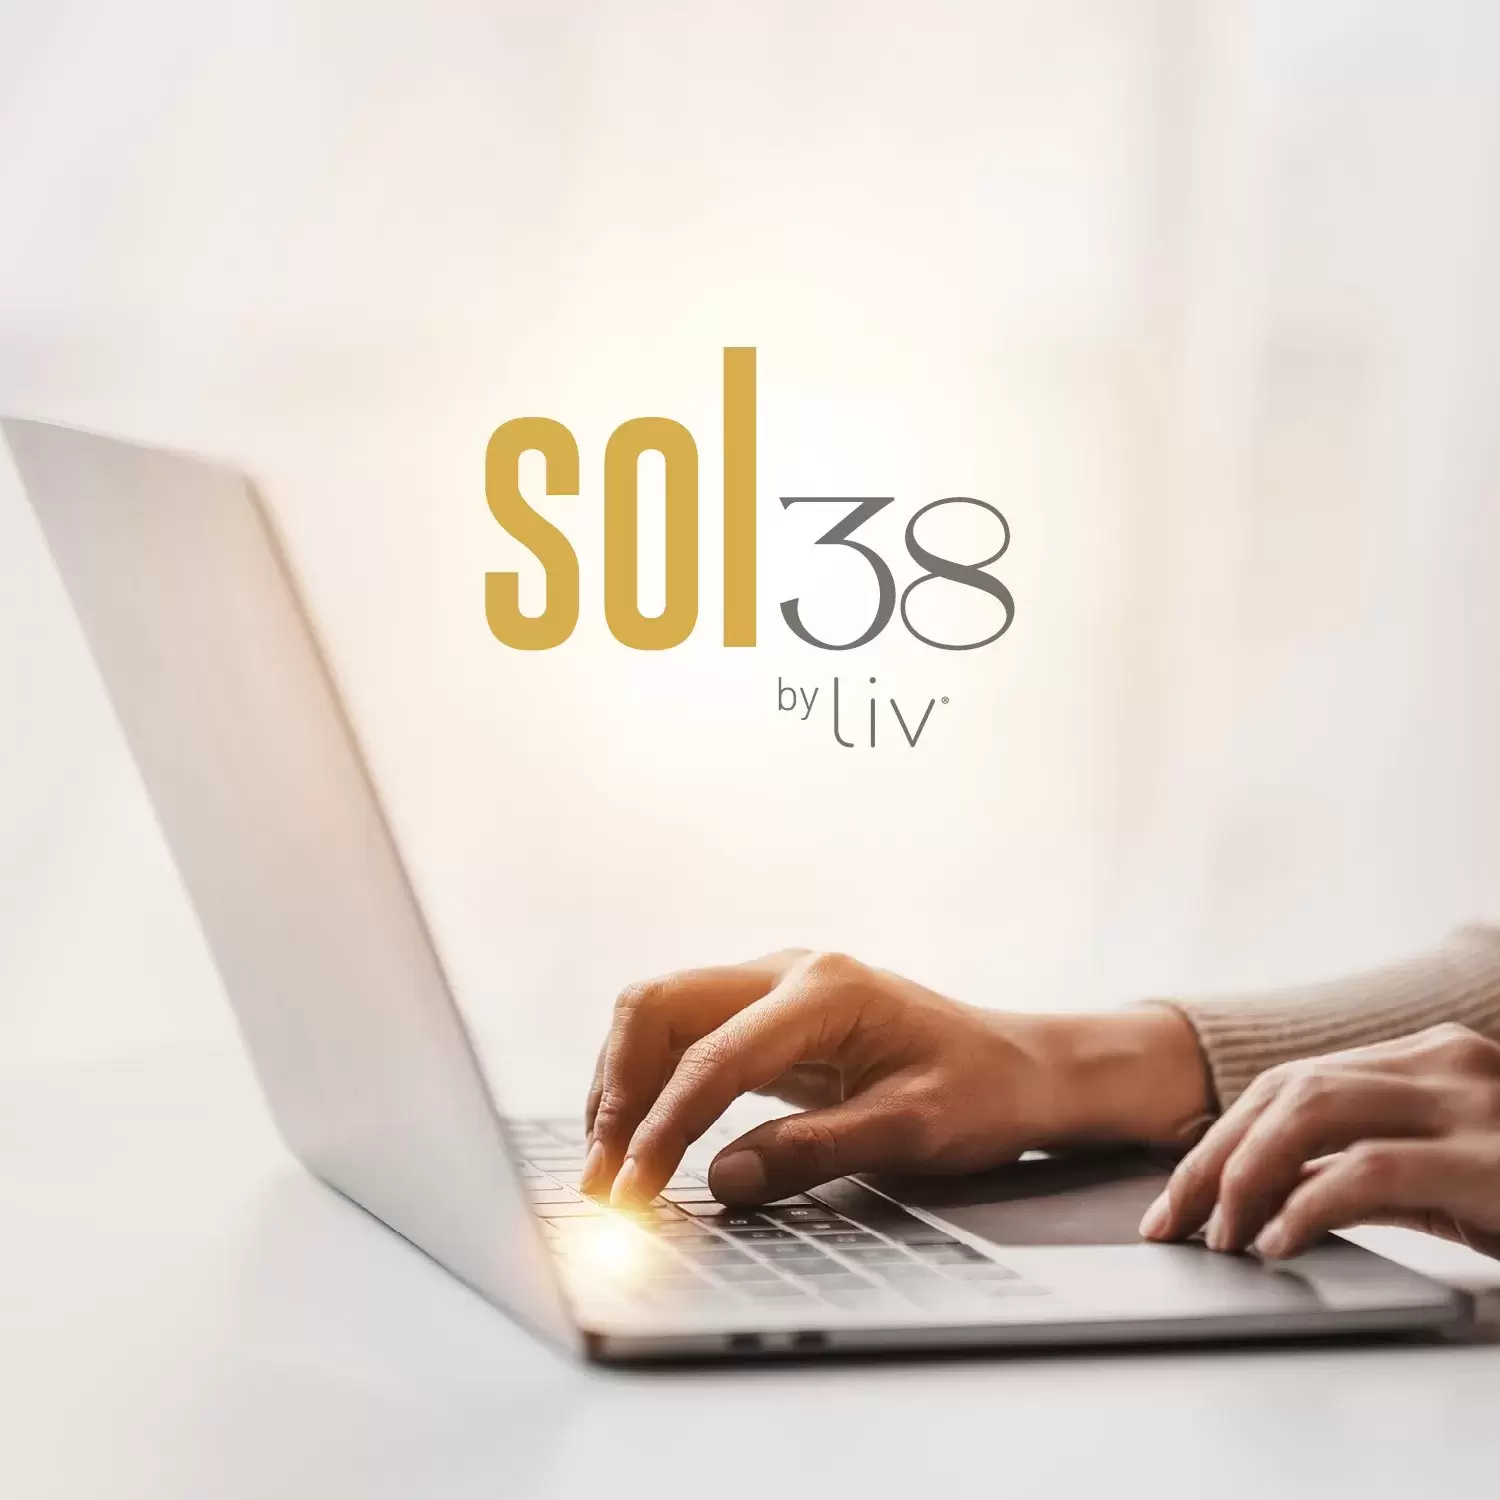 Get your wishlist ready, because we're about to redefine apartment living! We gearing up to welcome you HOME!

Hop on our website to explore our available floorplans and so much more. ➡ www.sol38byliv.com